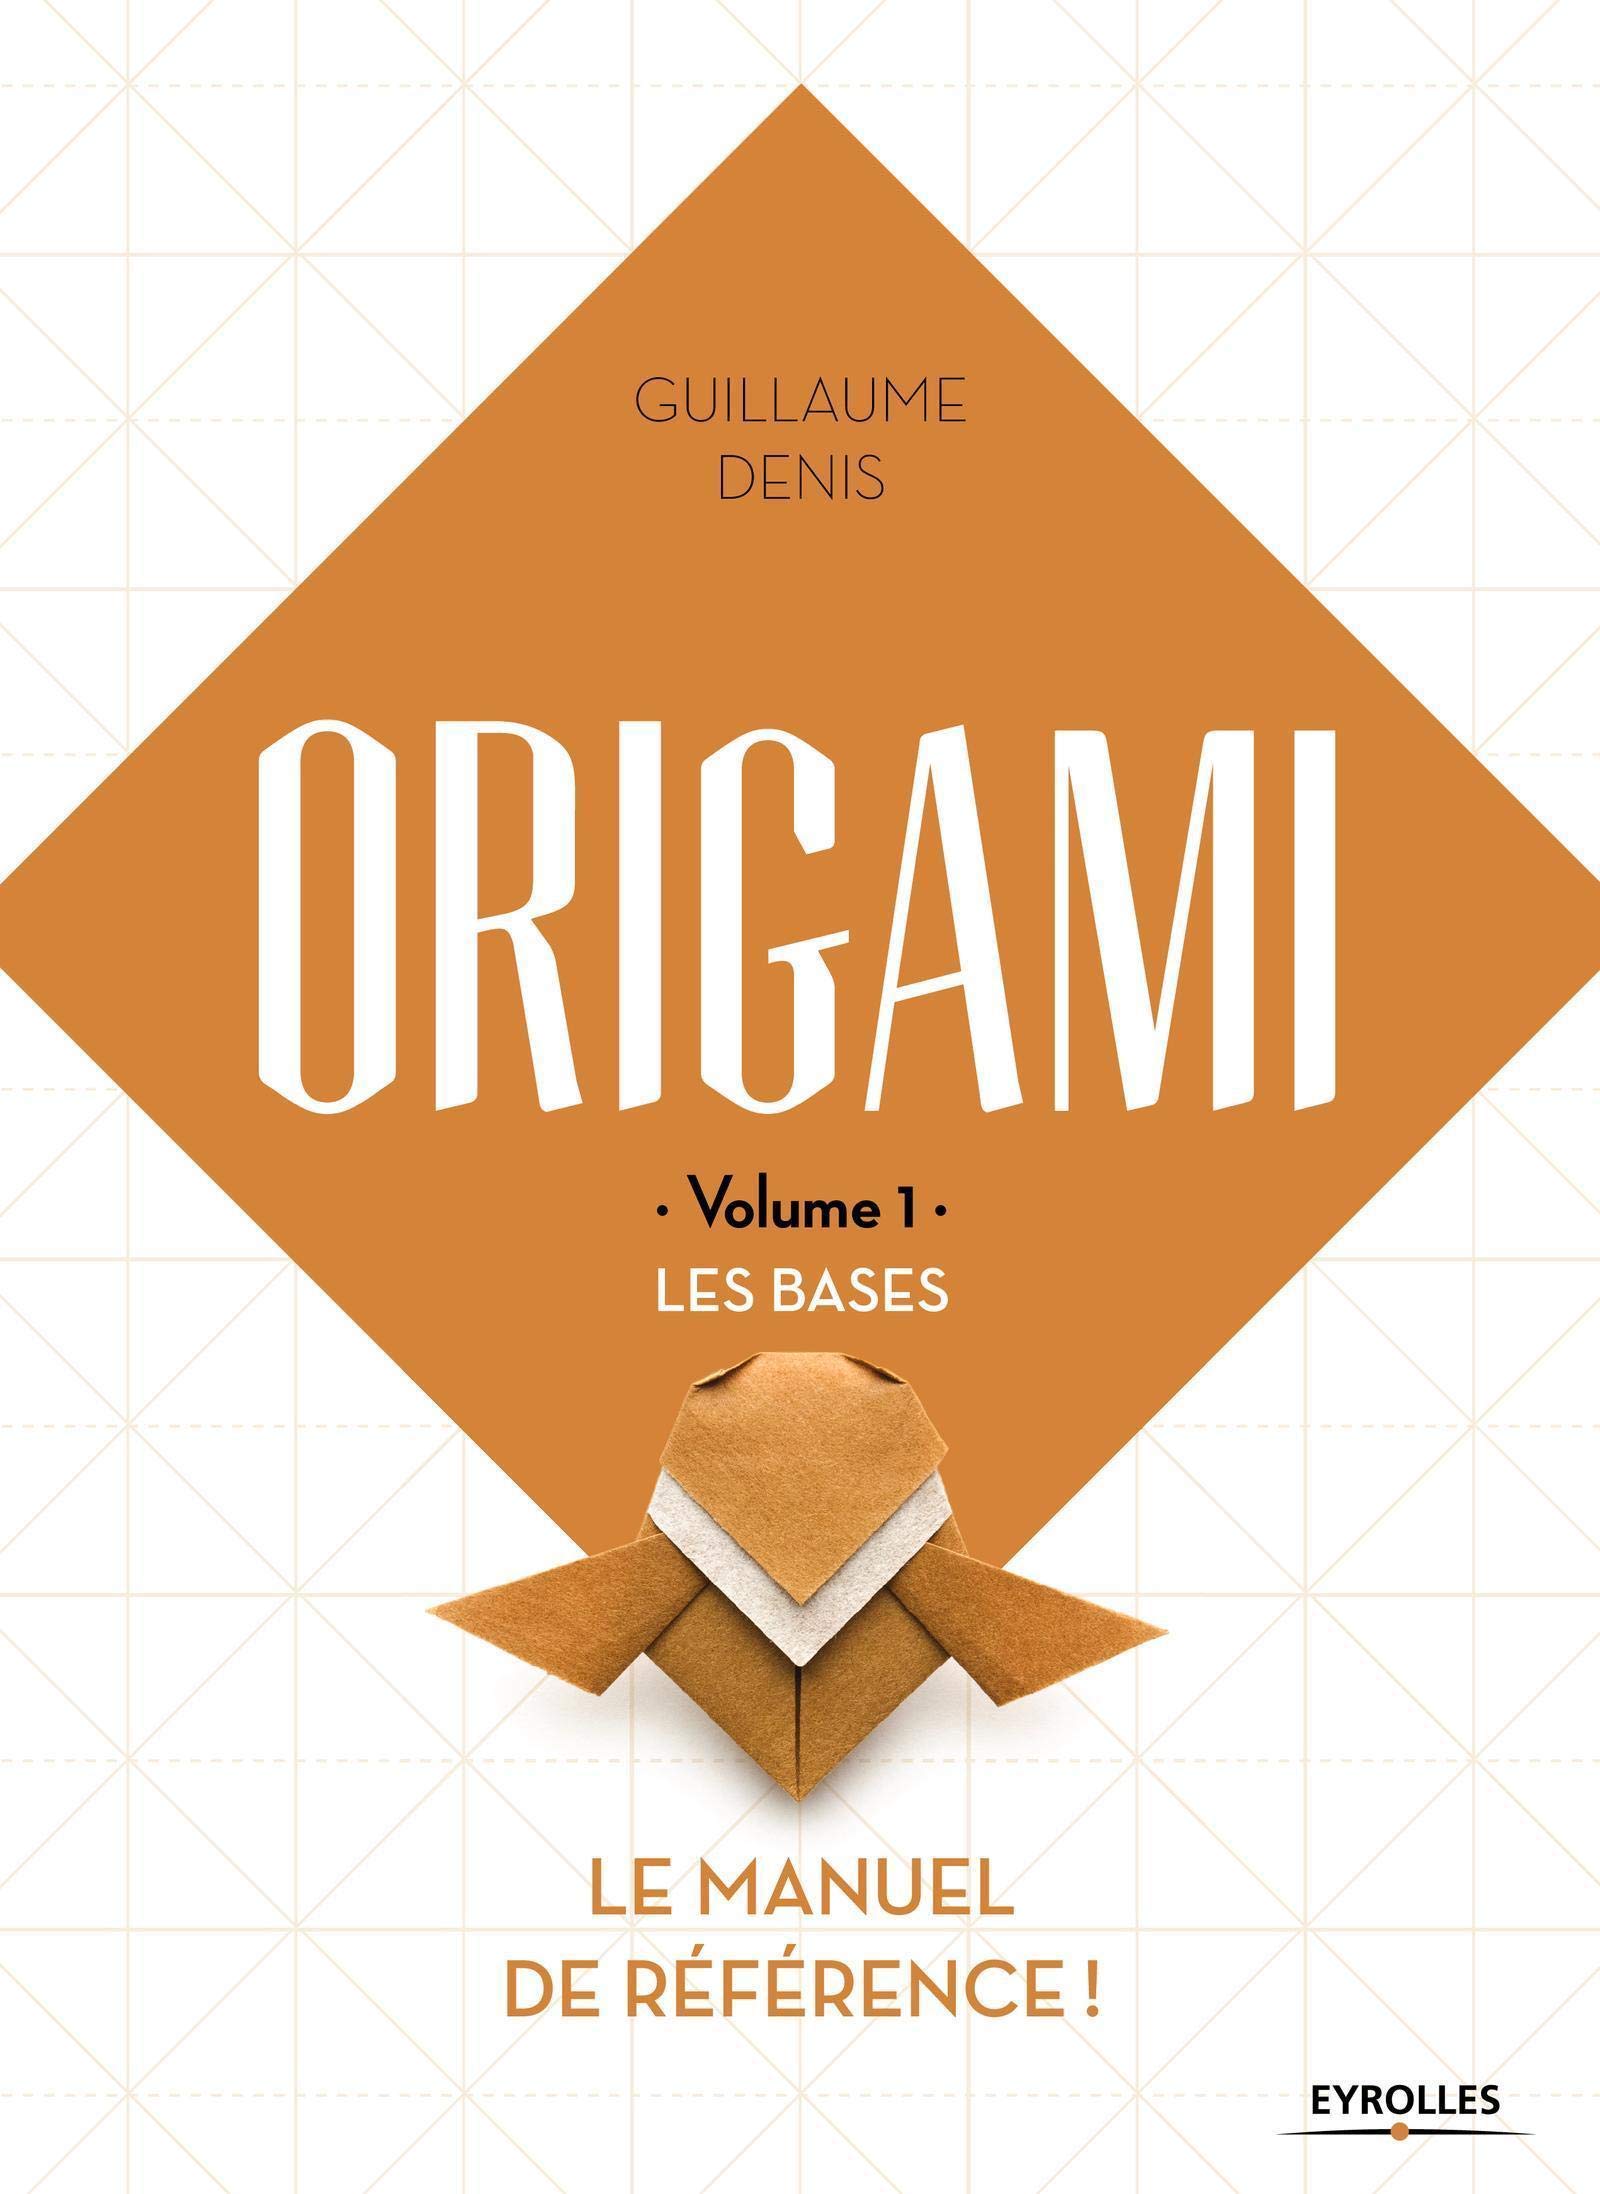 ORIGAMI - Volume 1 - LES BASES : page 214.